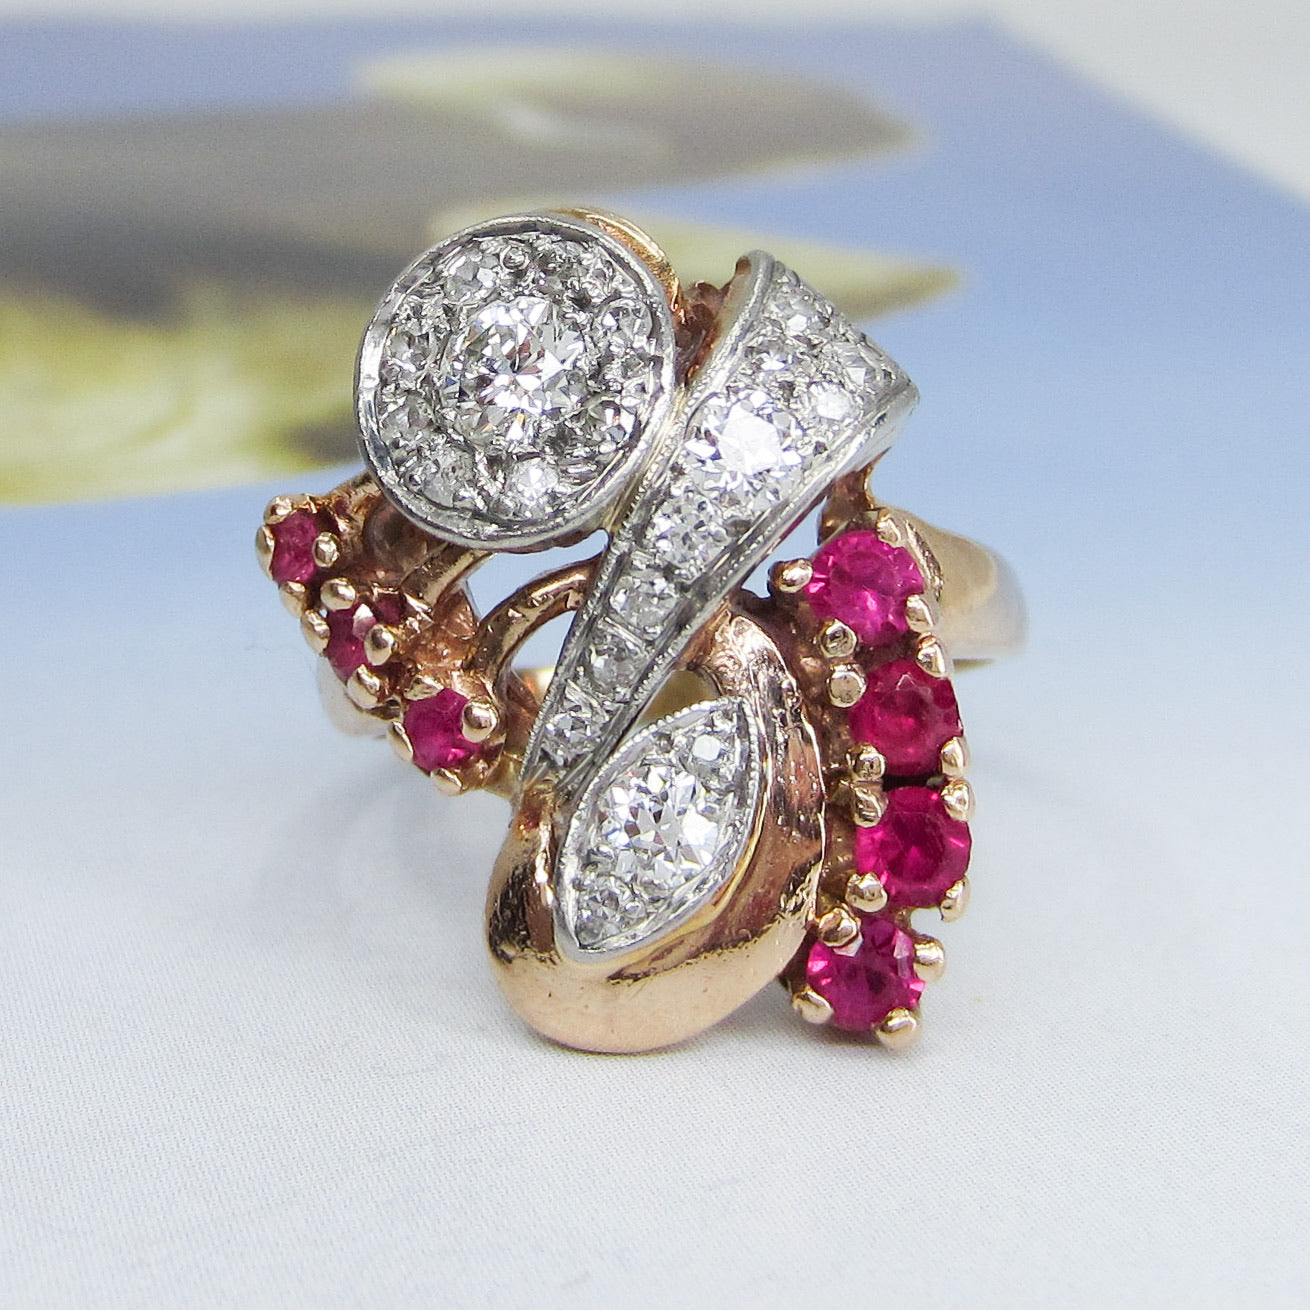 SOLD—Vintage Retro Old Hollywood Diamond and Ruby Ring 14k c. 1940 ...